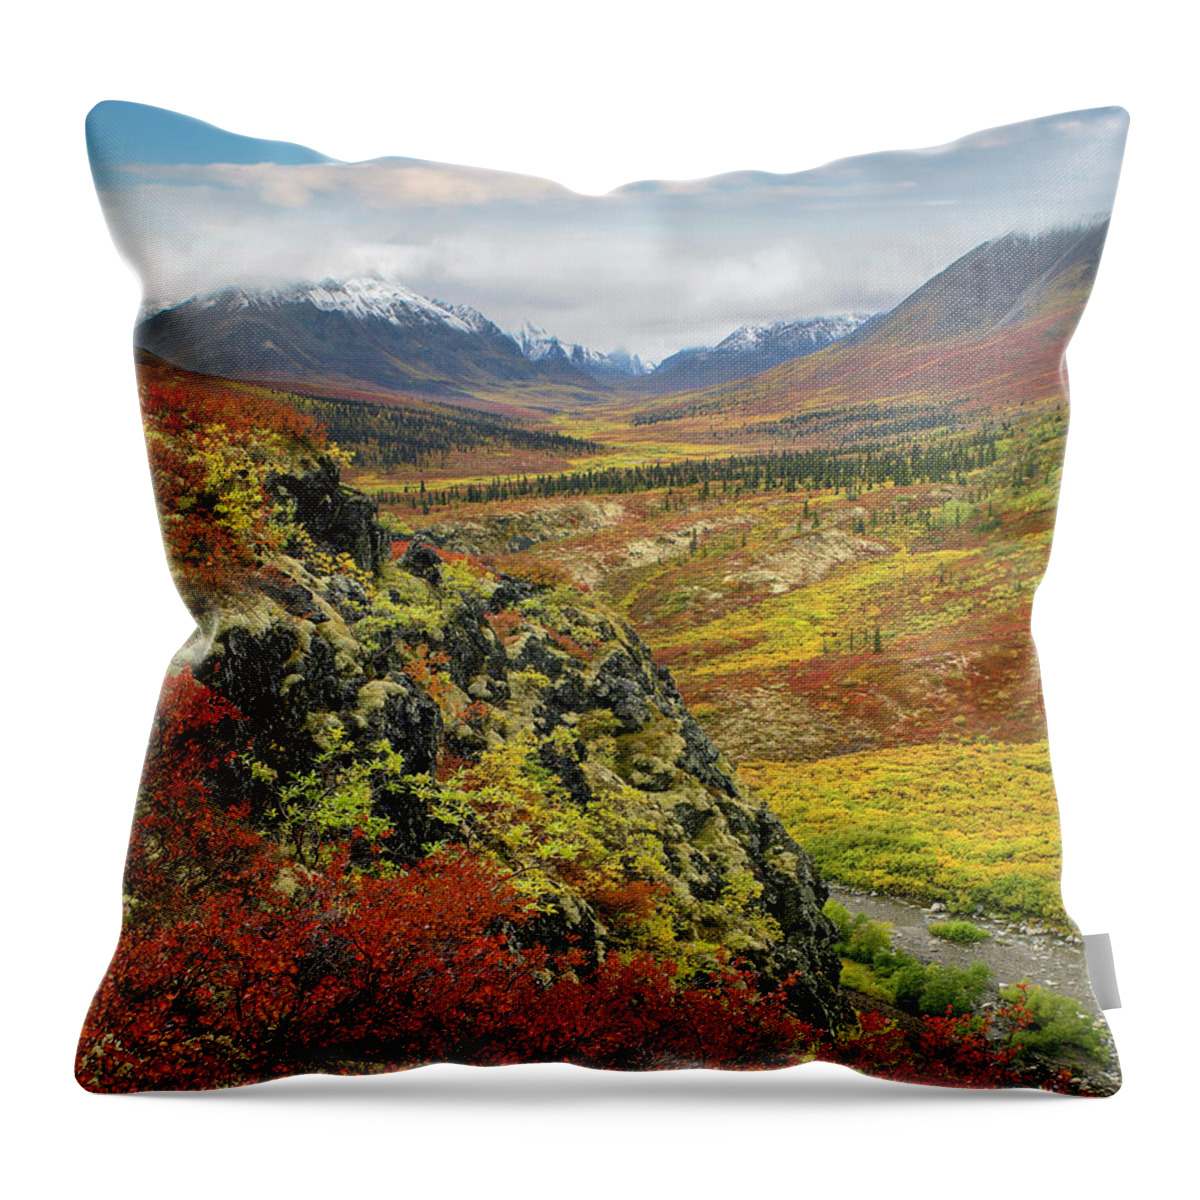 00586334 Throw Pillow featuring the photograph Autumn Tundra, Tombstone Range, Tombstone Territorial Park, Yukon by Tim Fitzharris